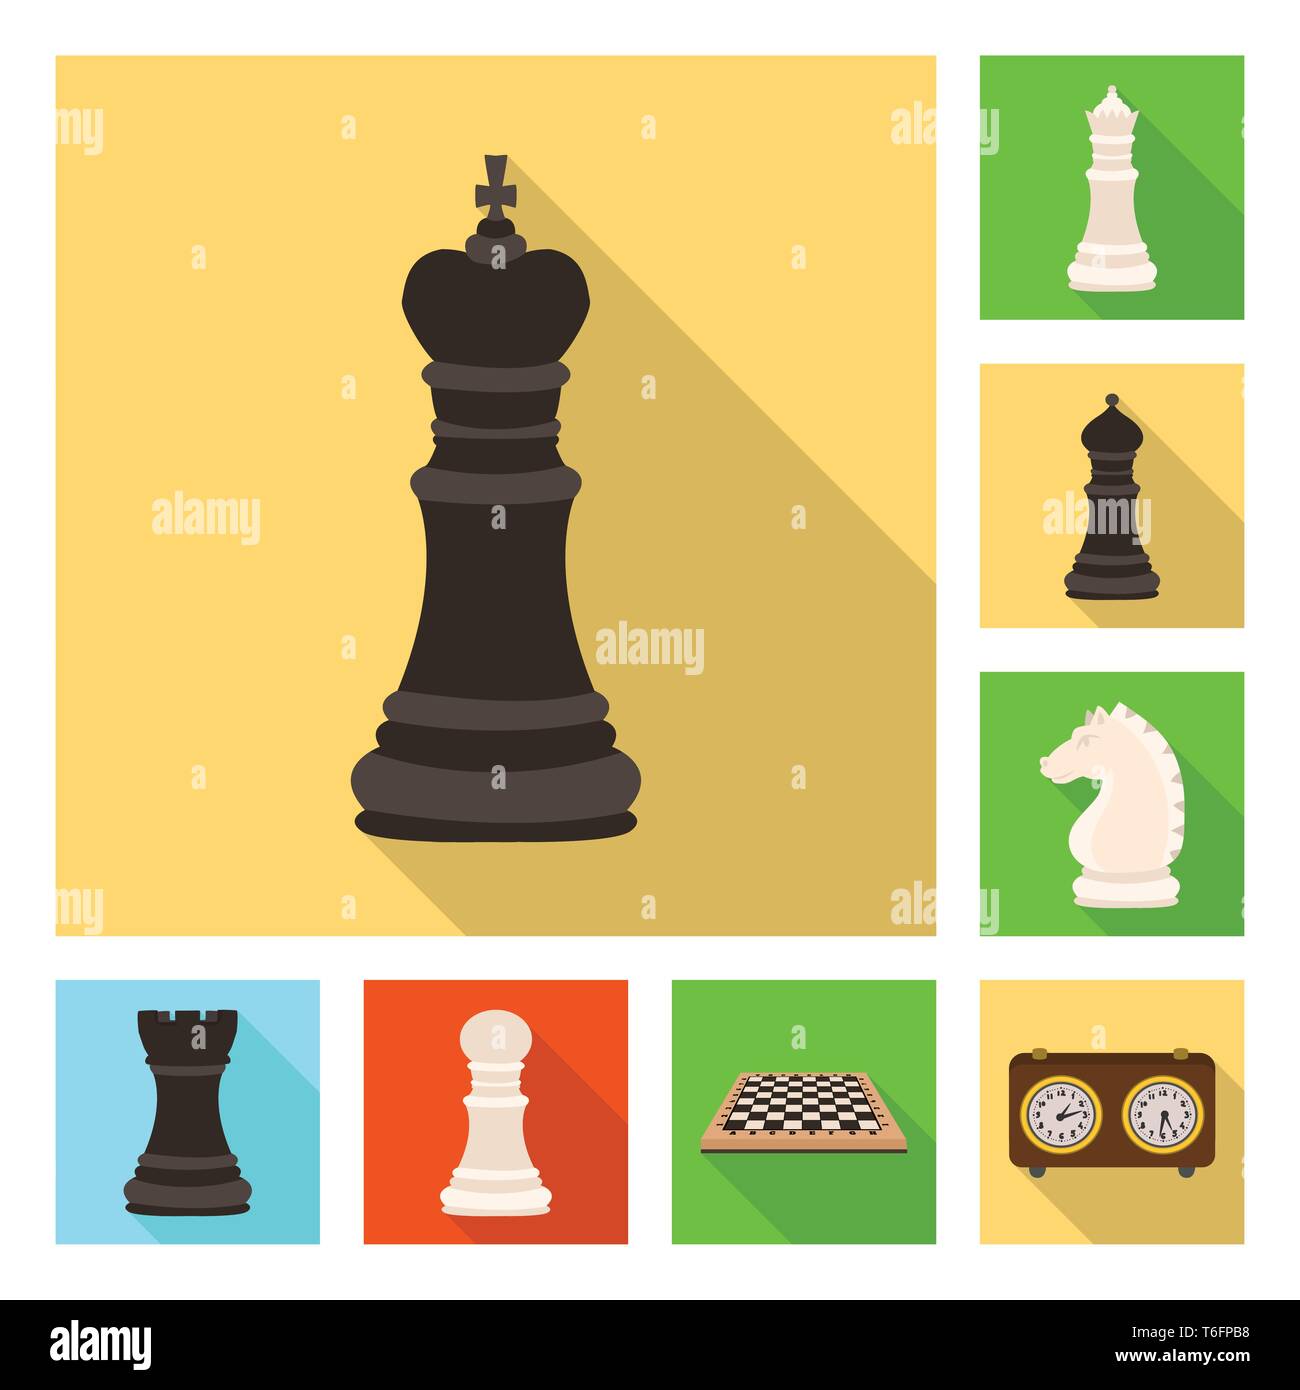 How To Checkmate With A Rook And A Bishop? - Chess Game Strategies